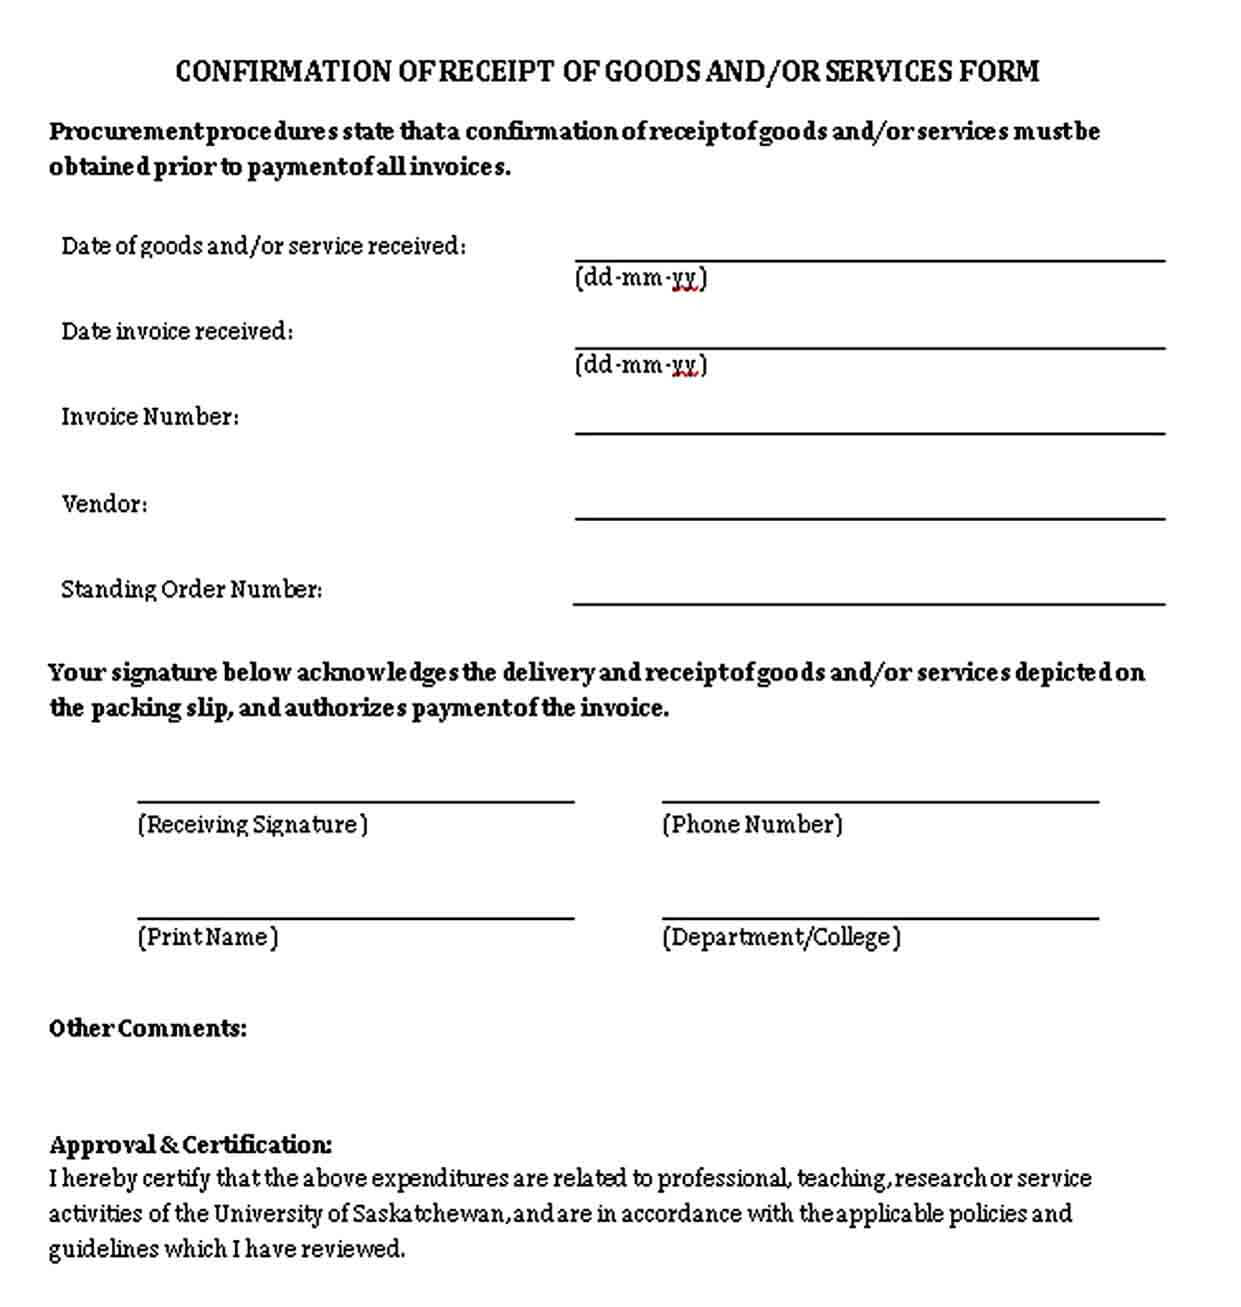 Confirmation of Receipt of Goods and Services Form 1